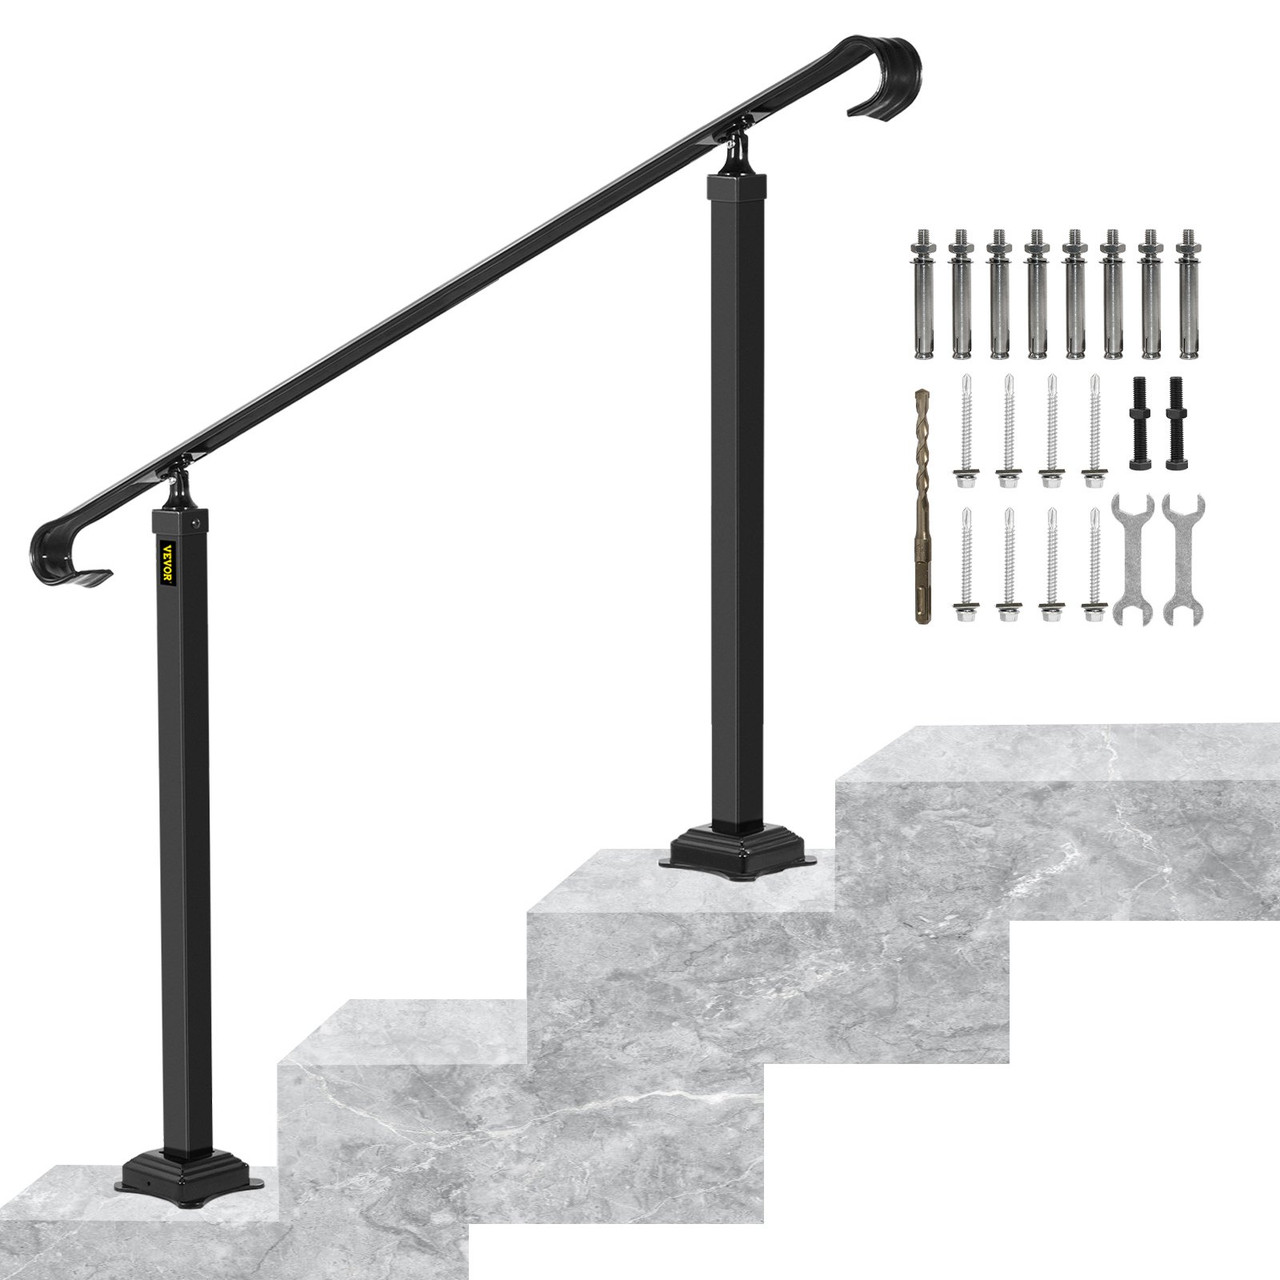 Handrails for Outdoor Steps, Fit 1-3 Steps Outdoor Stair Railing, Wrought Iron Handrail, Adjustable Front Porch Hand Rail, Black Transitional Hand railings for Concrete Steps or Wooden Stairs